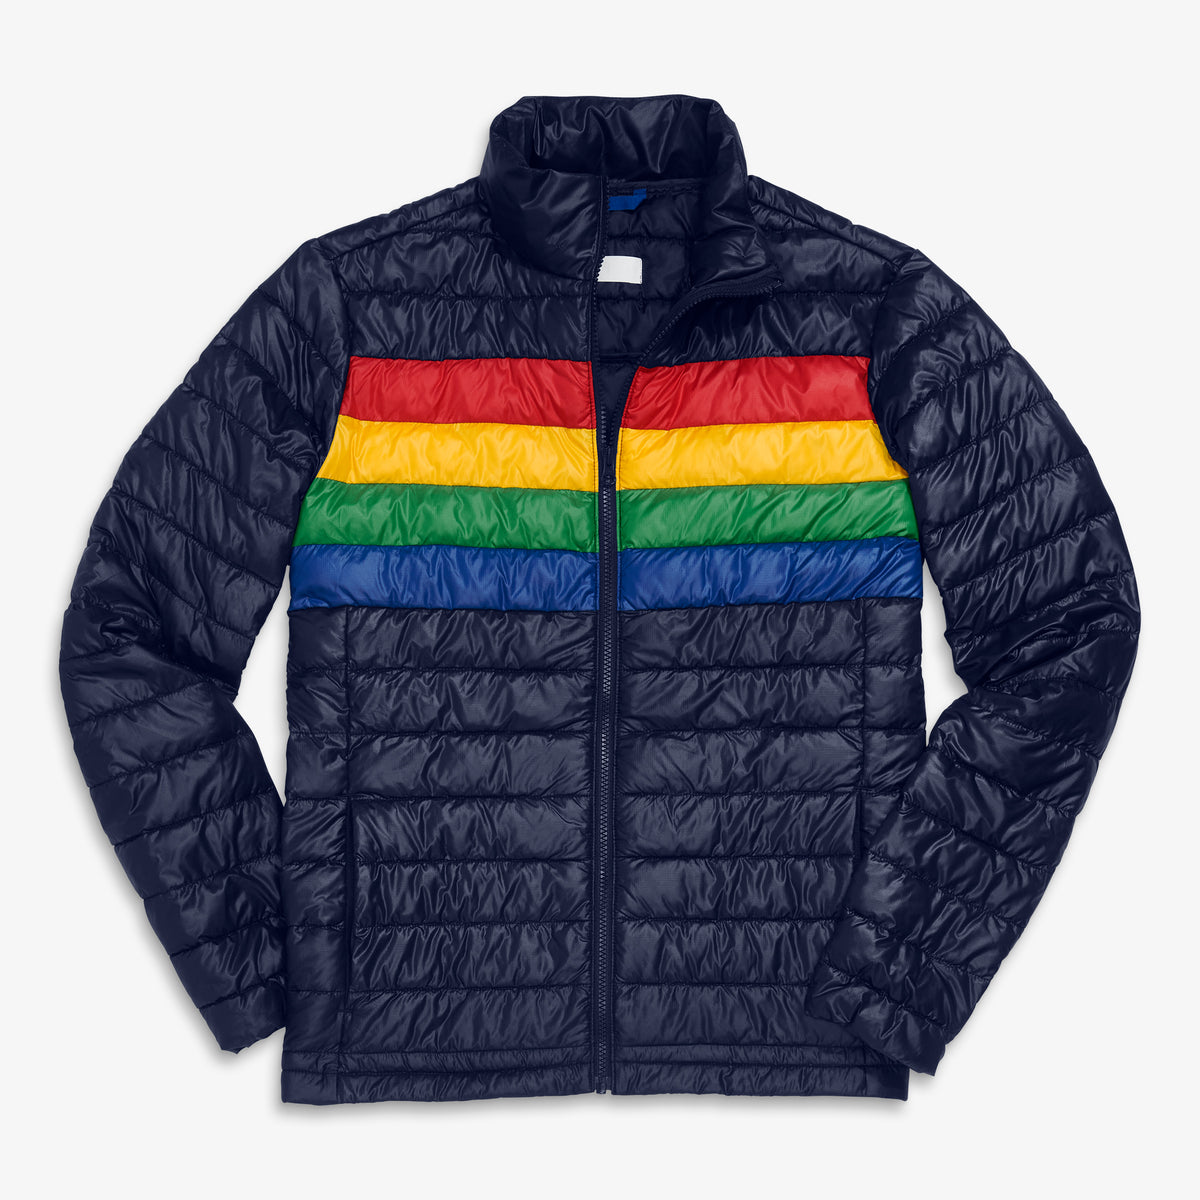 Grown-ups classic fit puffer jacket in rainbow stripe